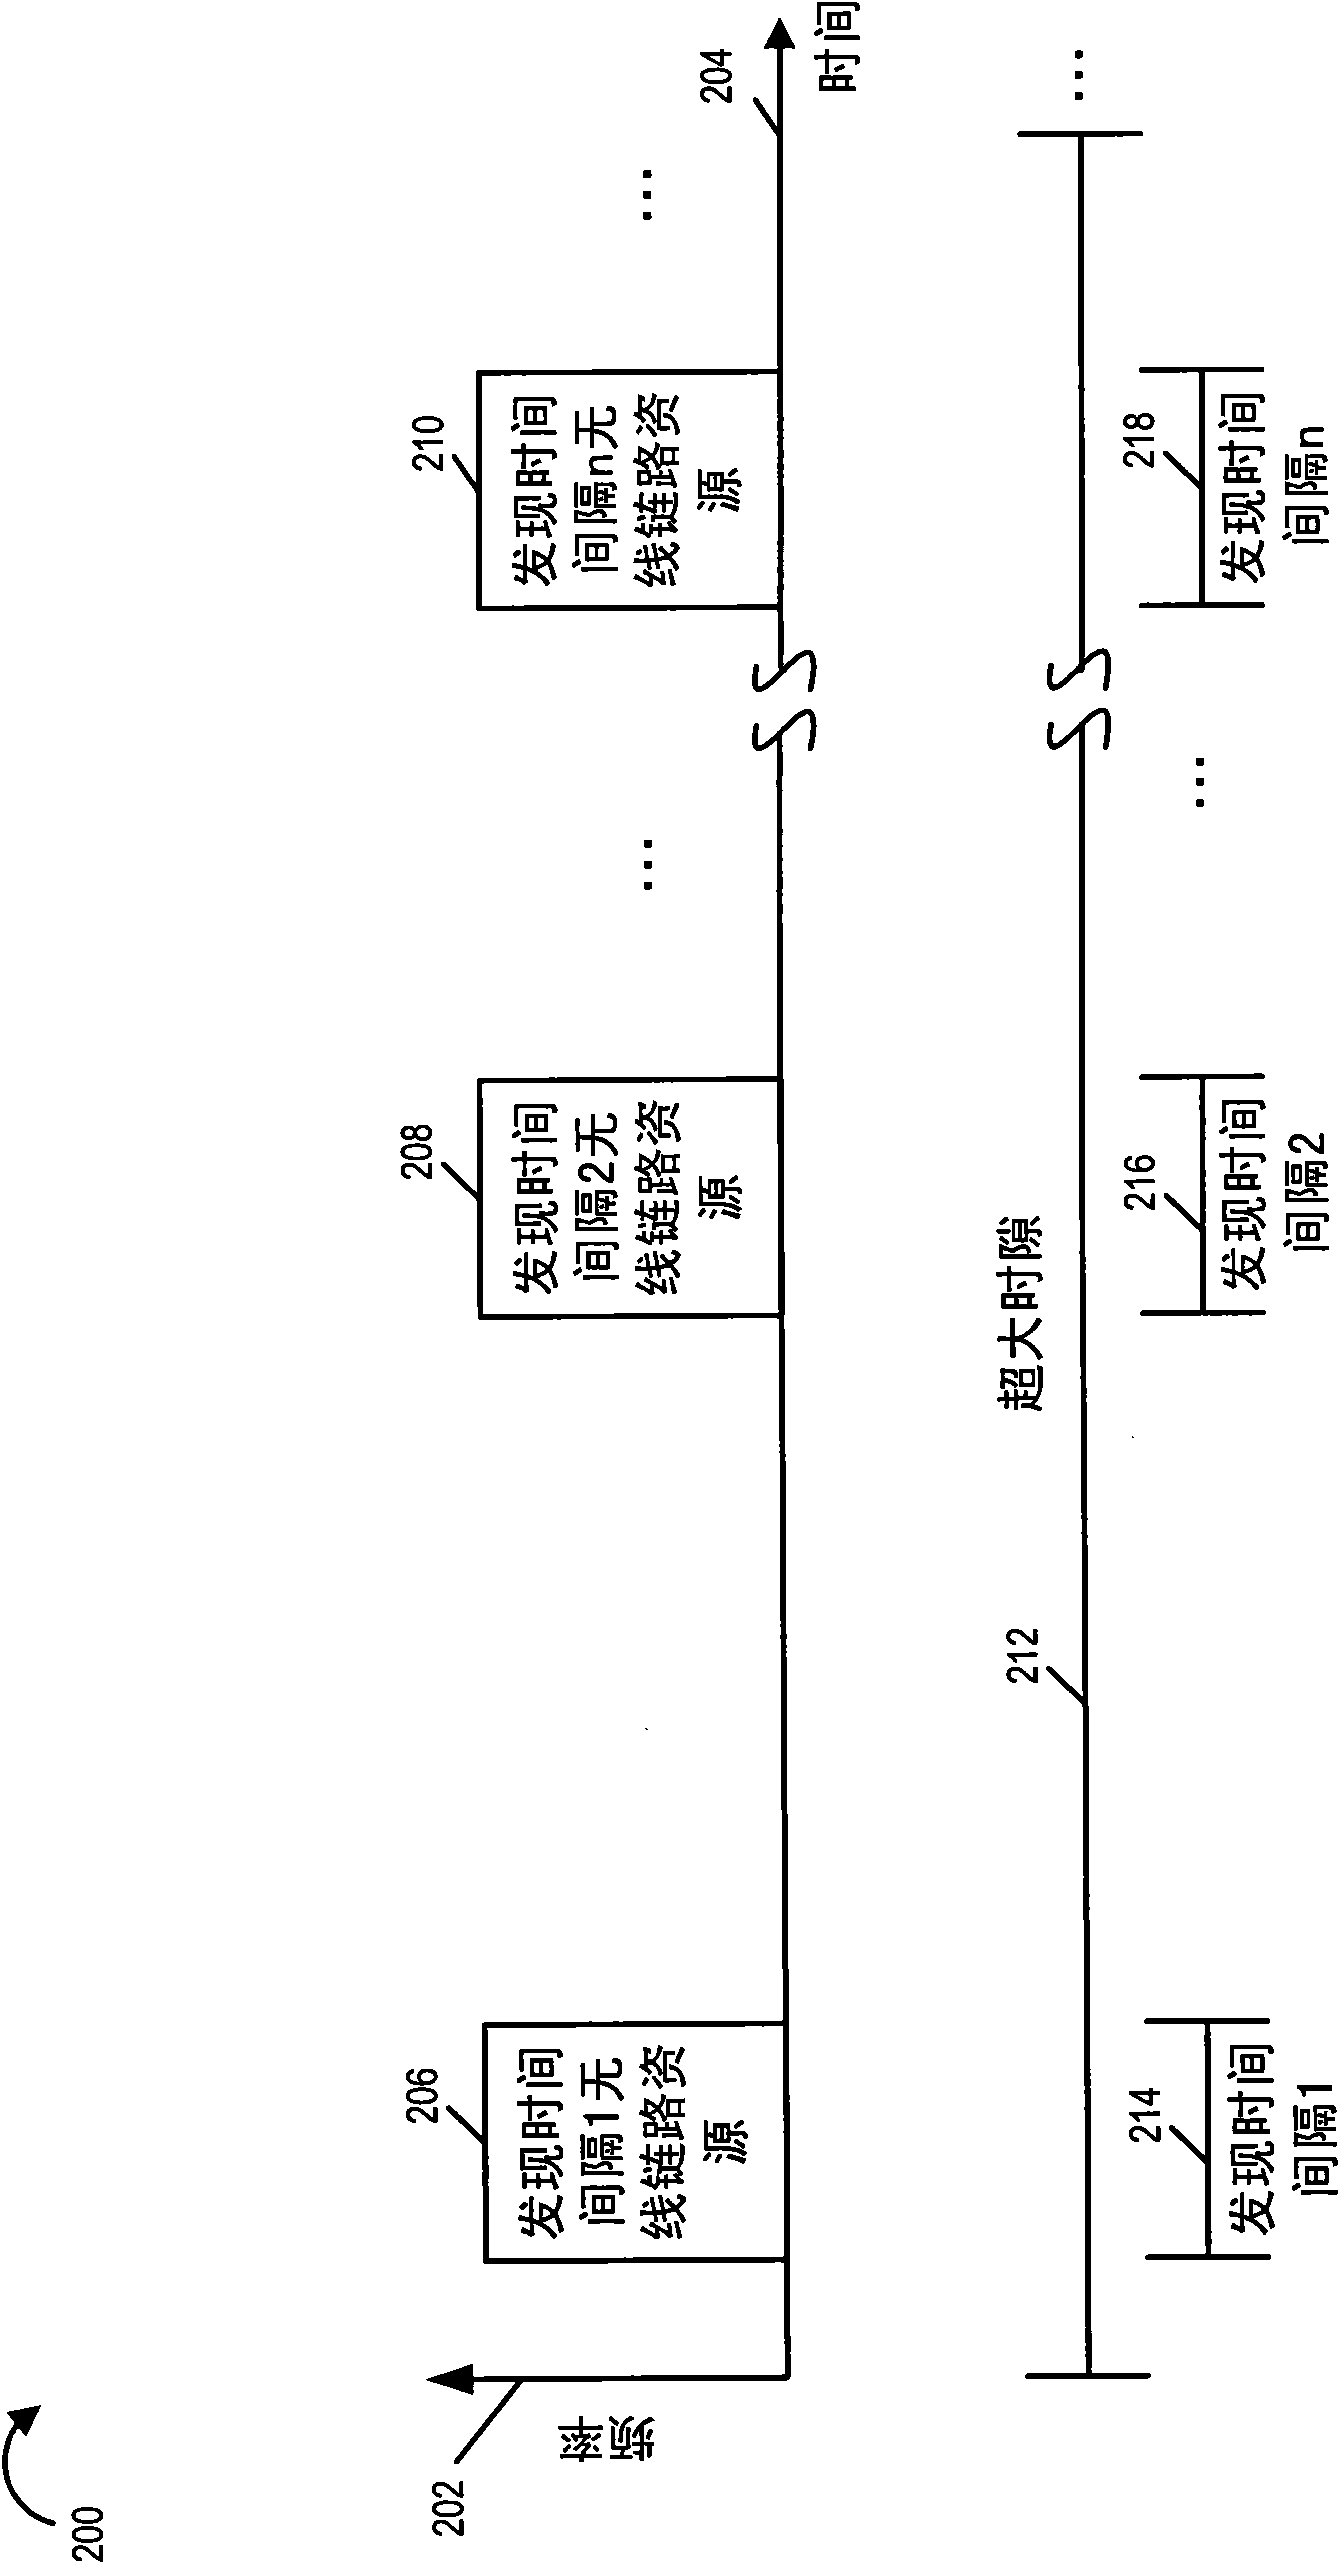 Methods and apparatus for peer discovery assist